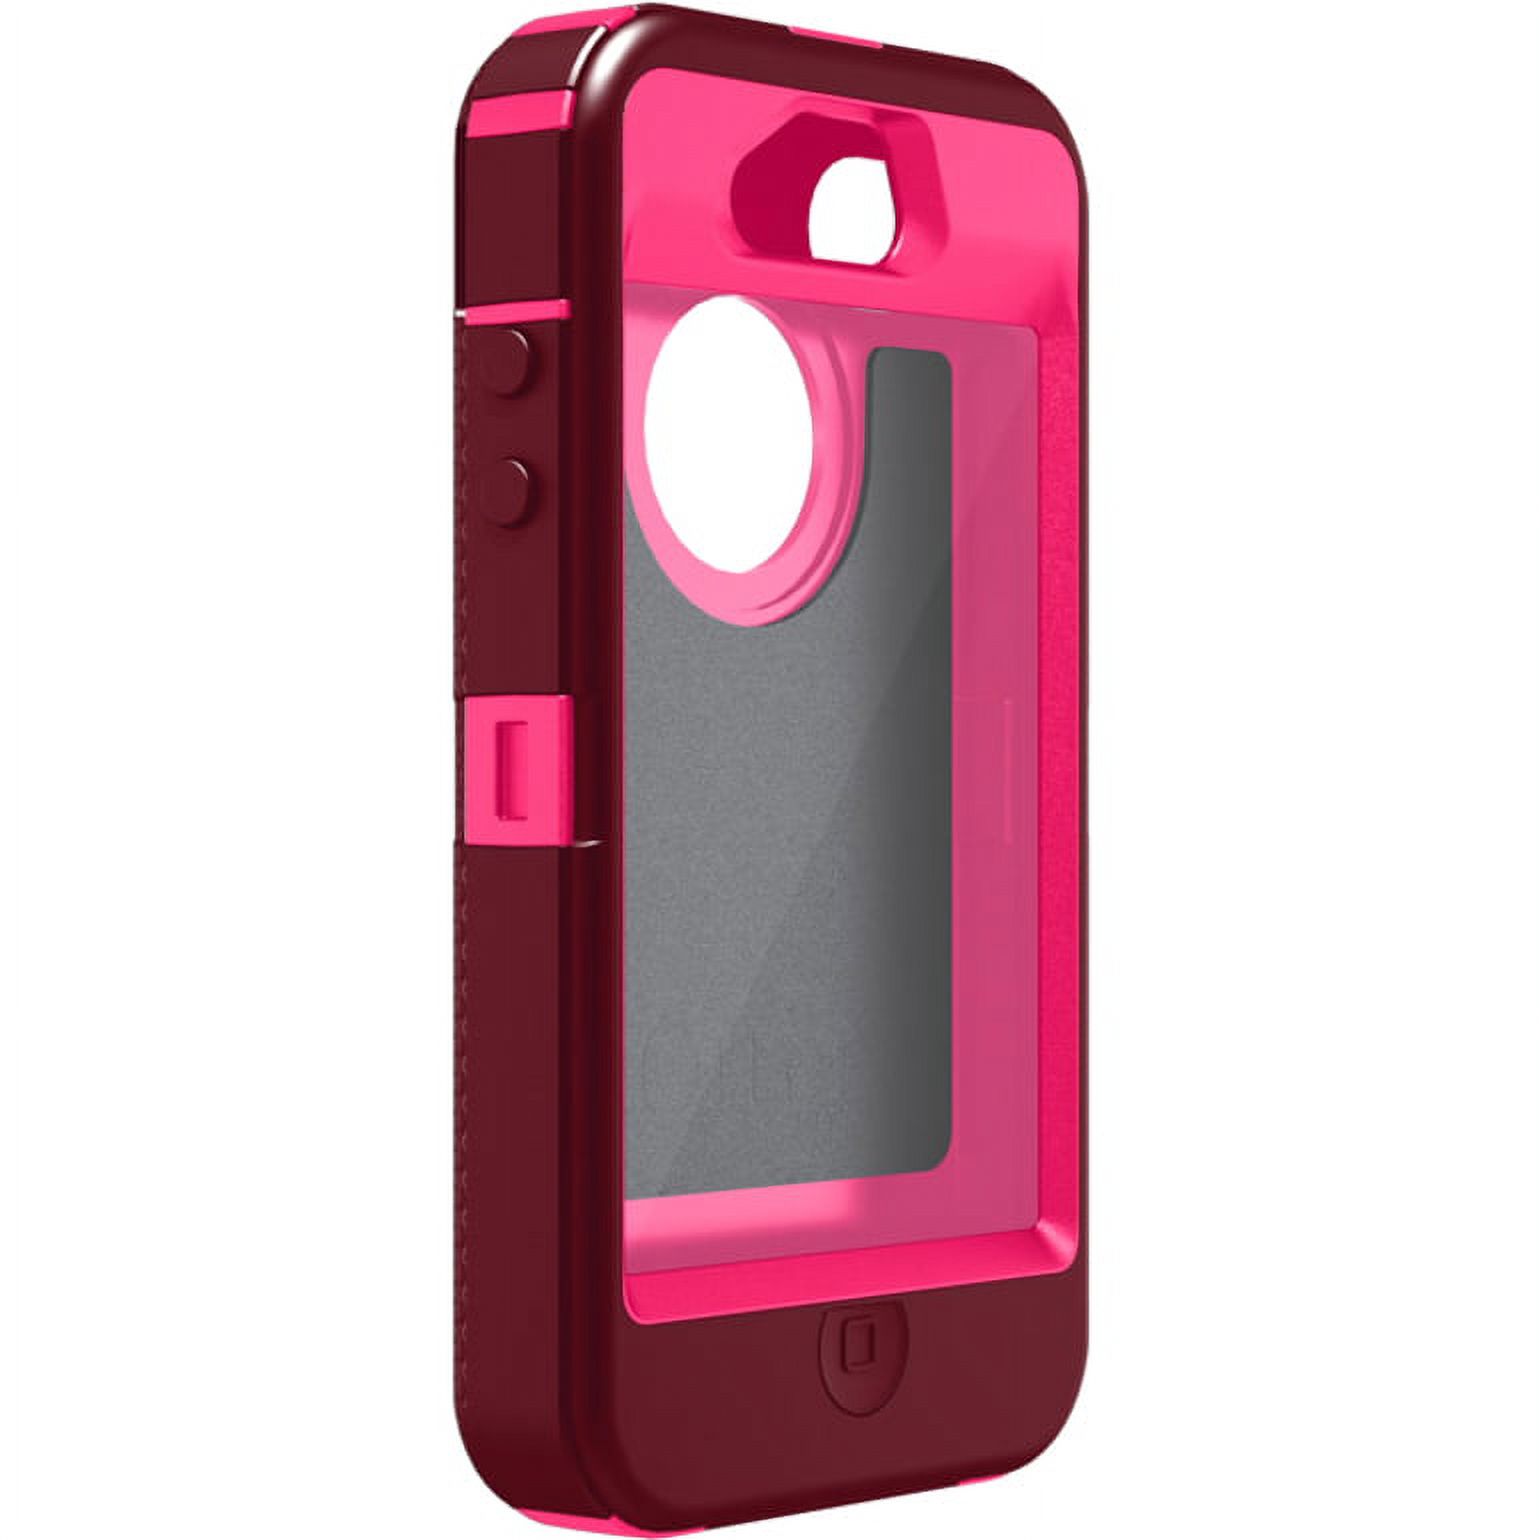 OtterBox Defender Rugged Carrying Case (Holster) Apple iPhone 4S, iPhone 4 Smartphone, Deep Plum, Peony Pink - image 3 of 5